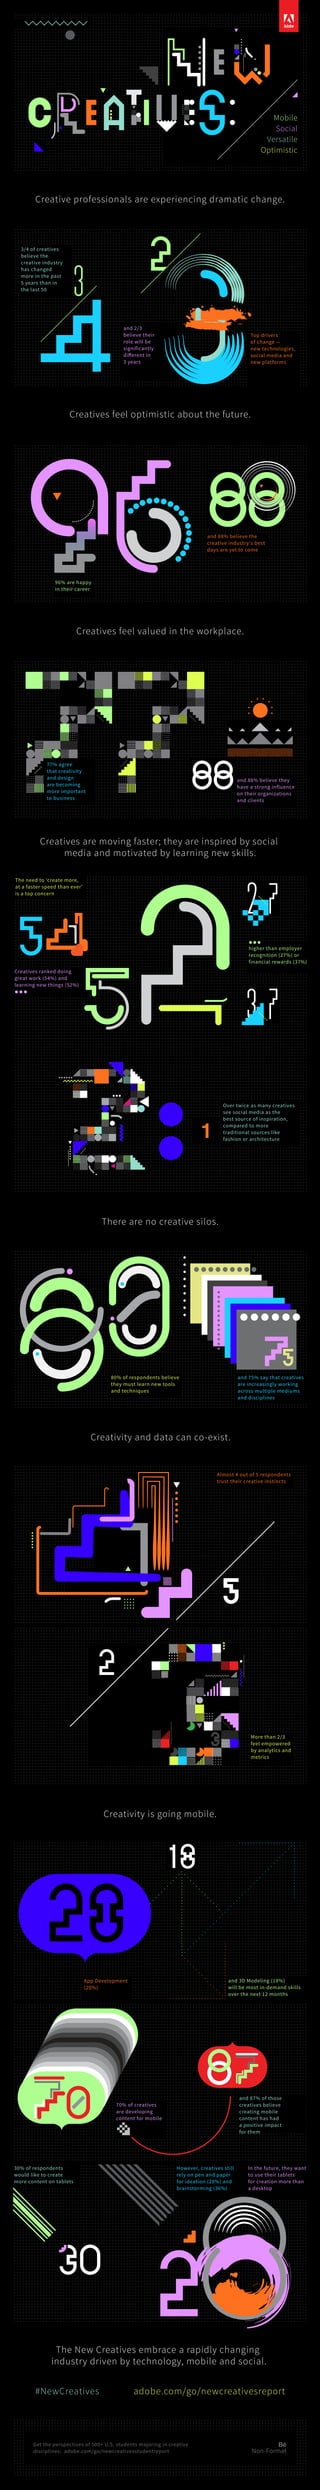 The New Creatives - June 2014 Infographic